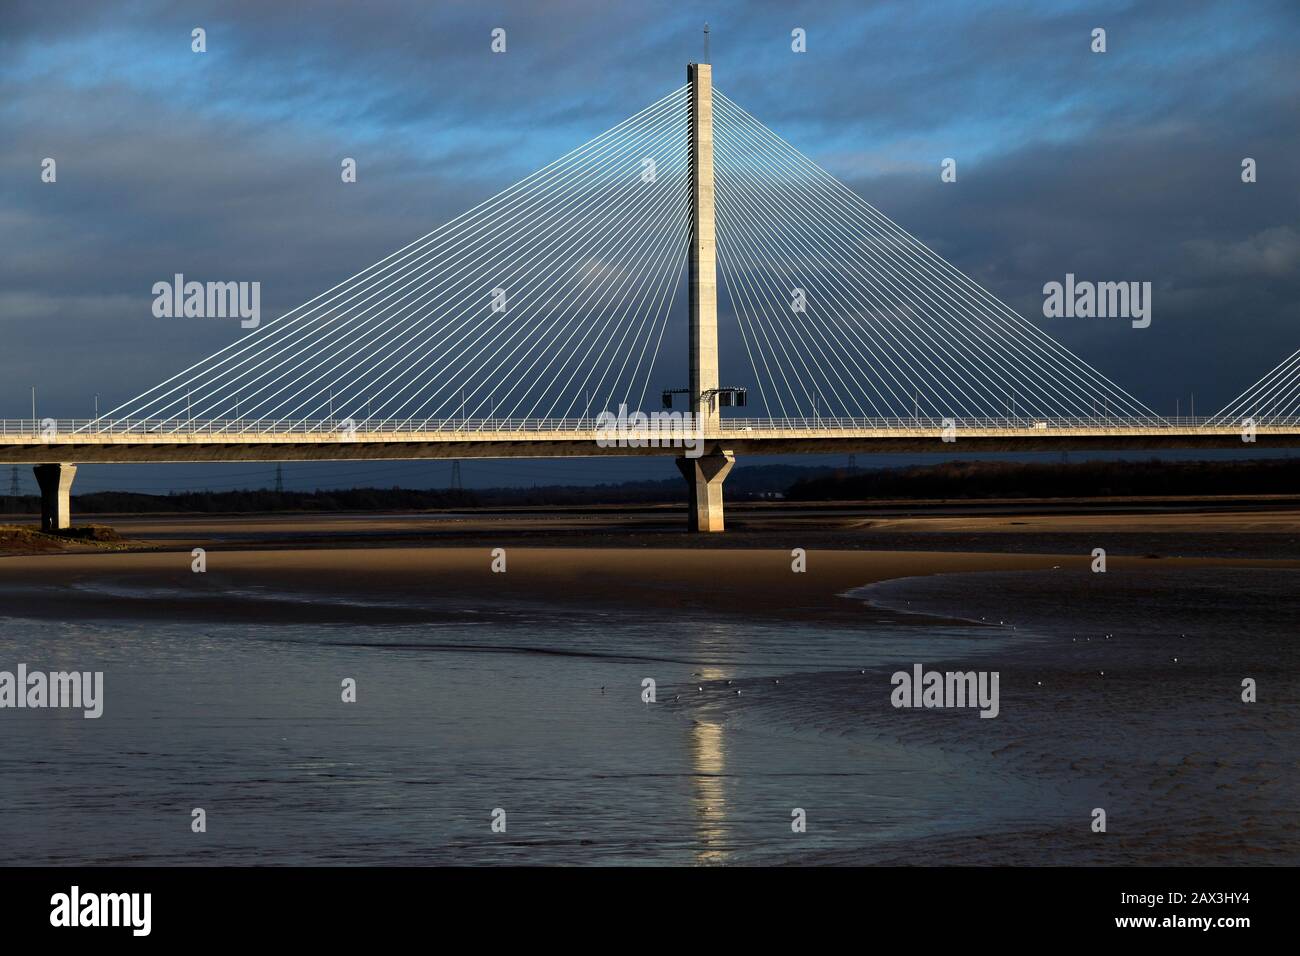 The new Mersey Gateway Bridge linking Widnes and Runcorn over the River Mersey Estuary, Widnes, Cheshire, UK Stock Photo